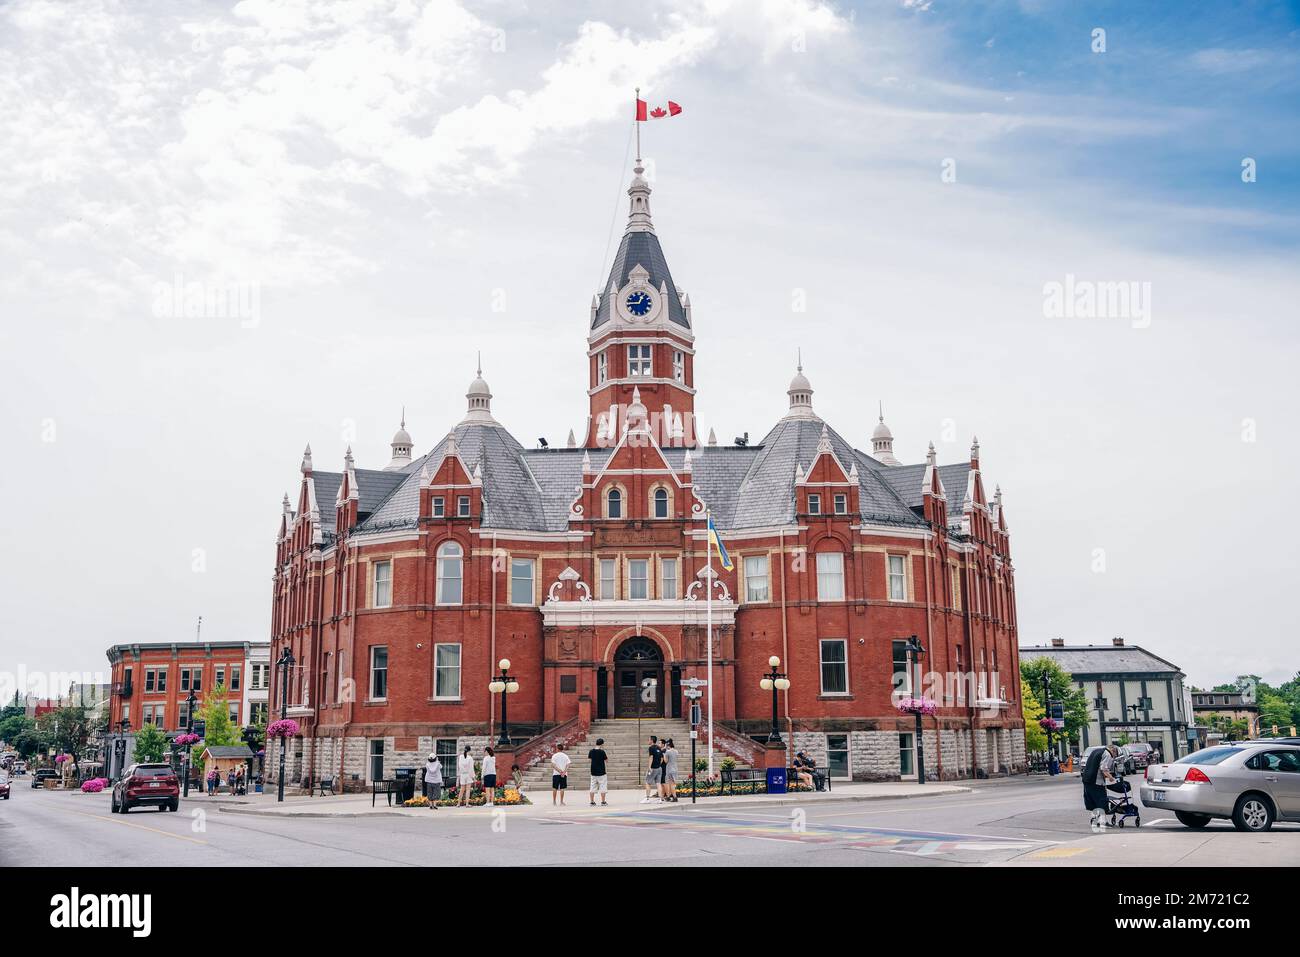 Red brick city hall with a clock tower in the scenic historic center in Stratford, Ontario - sep 2022. High quality photo Stock Photo